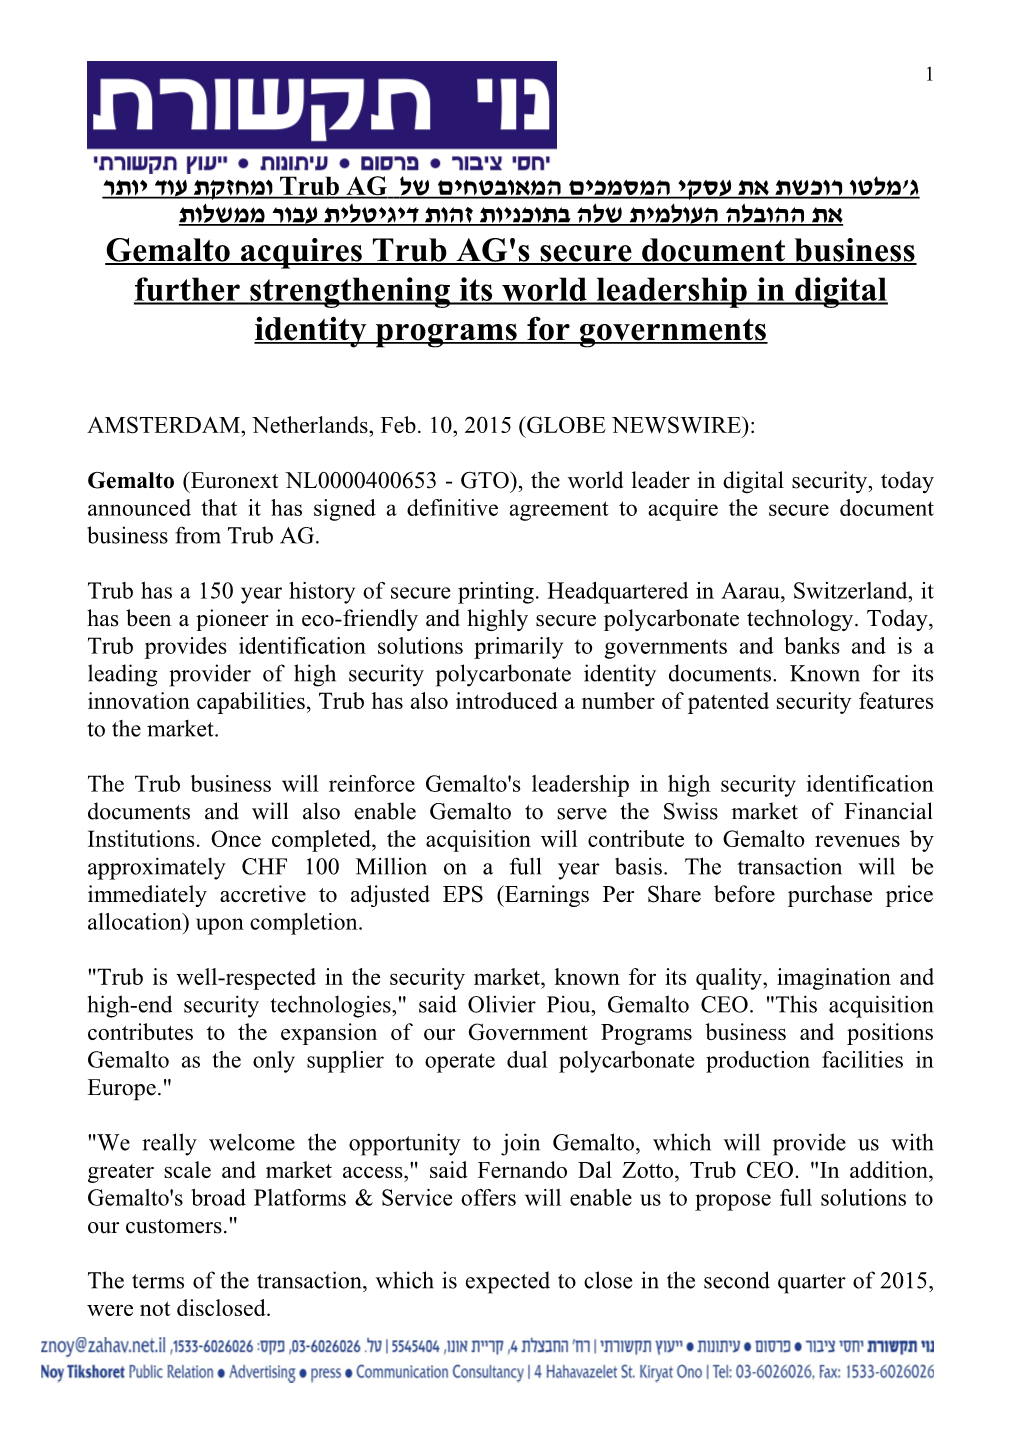 Gemalto Acquires Trub AG's Secure Document Business Further Strengthening Its World Leadership